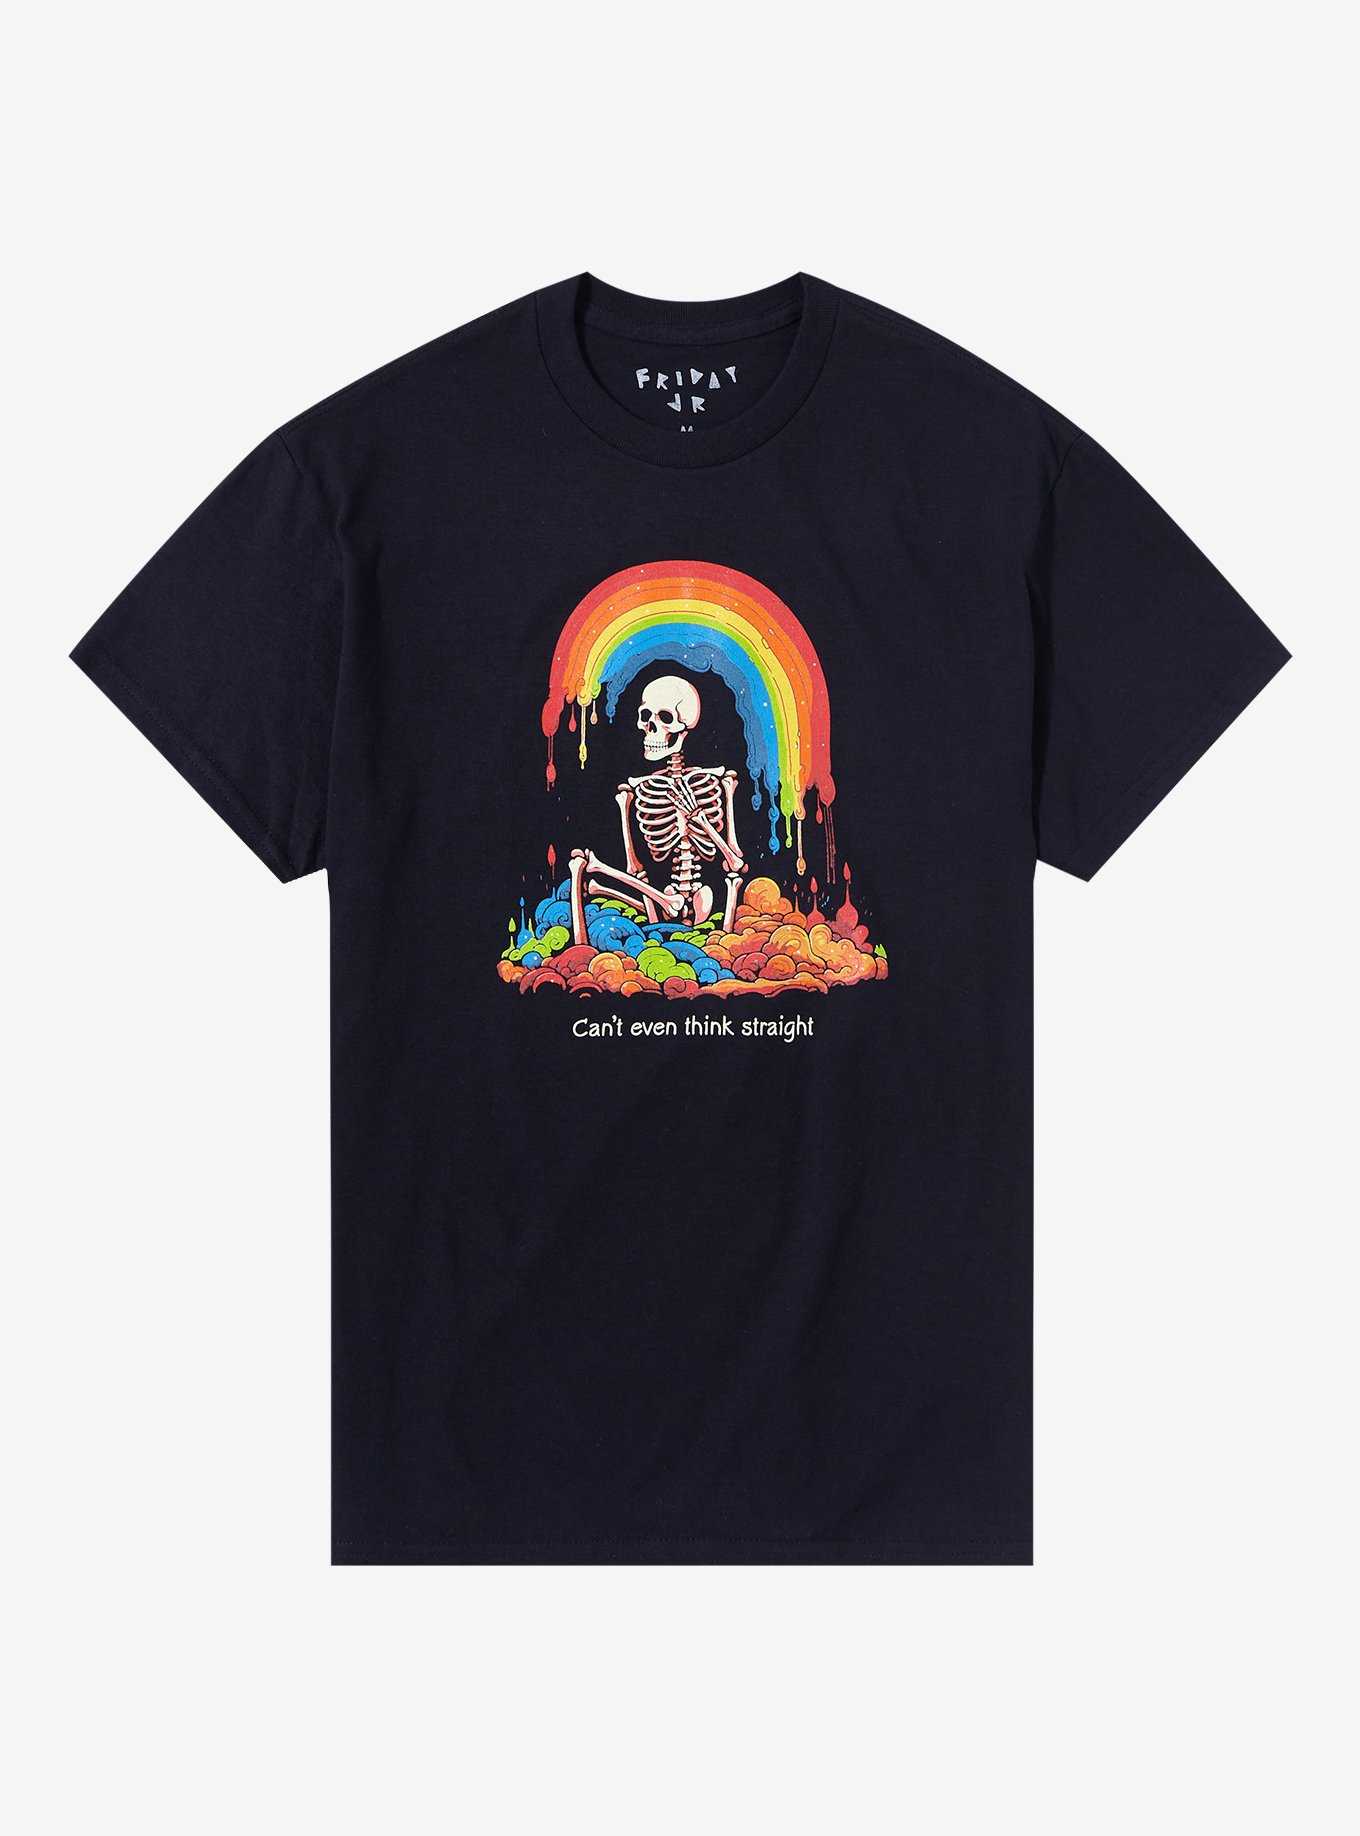 Skeleton Can't Think Straight T-Shirt by Friday Jr., , hi-res